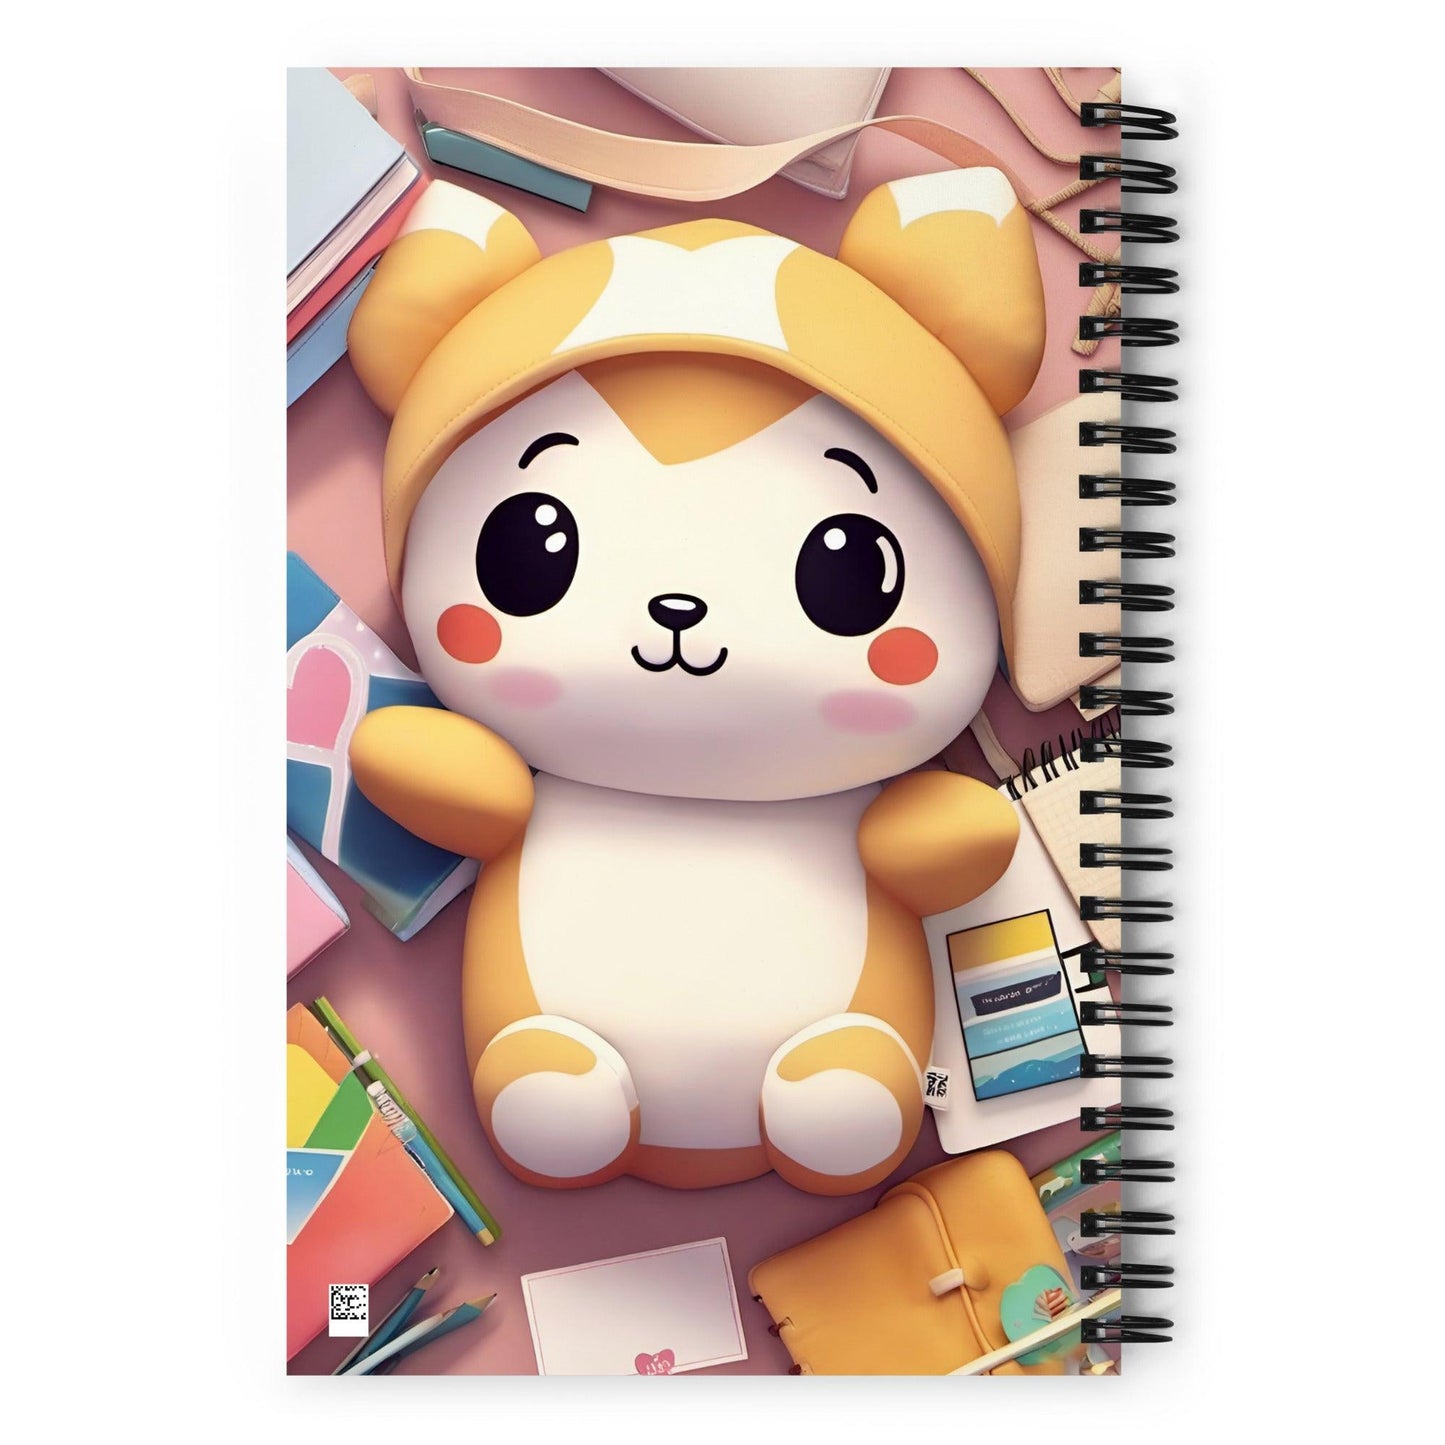 Cute Bear Cub Animation Spiral Notebook - Logan's Toy Chest